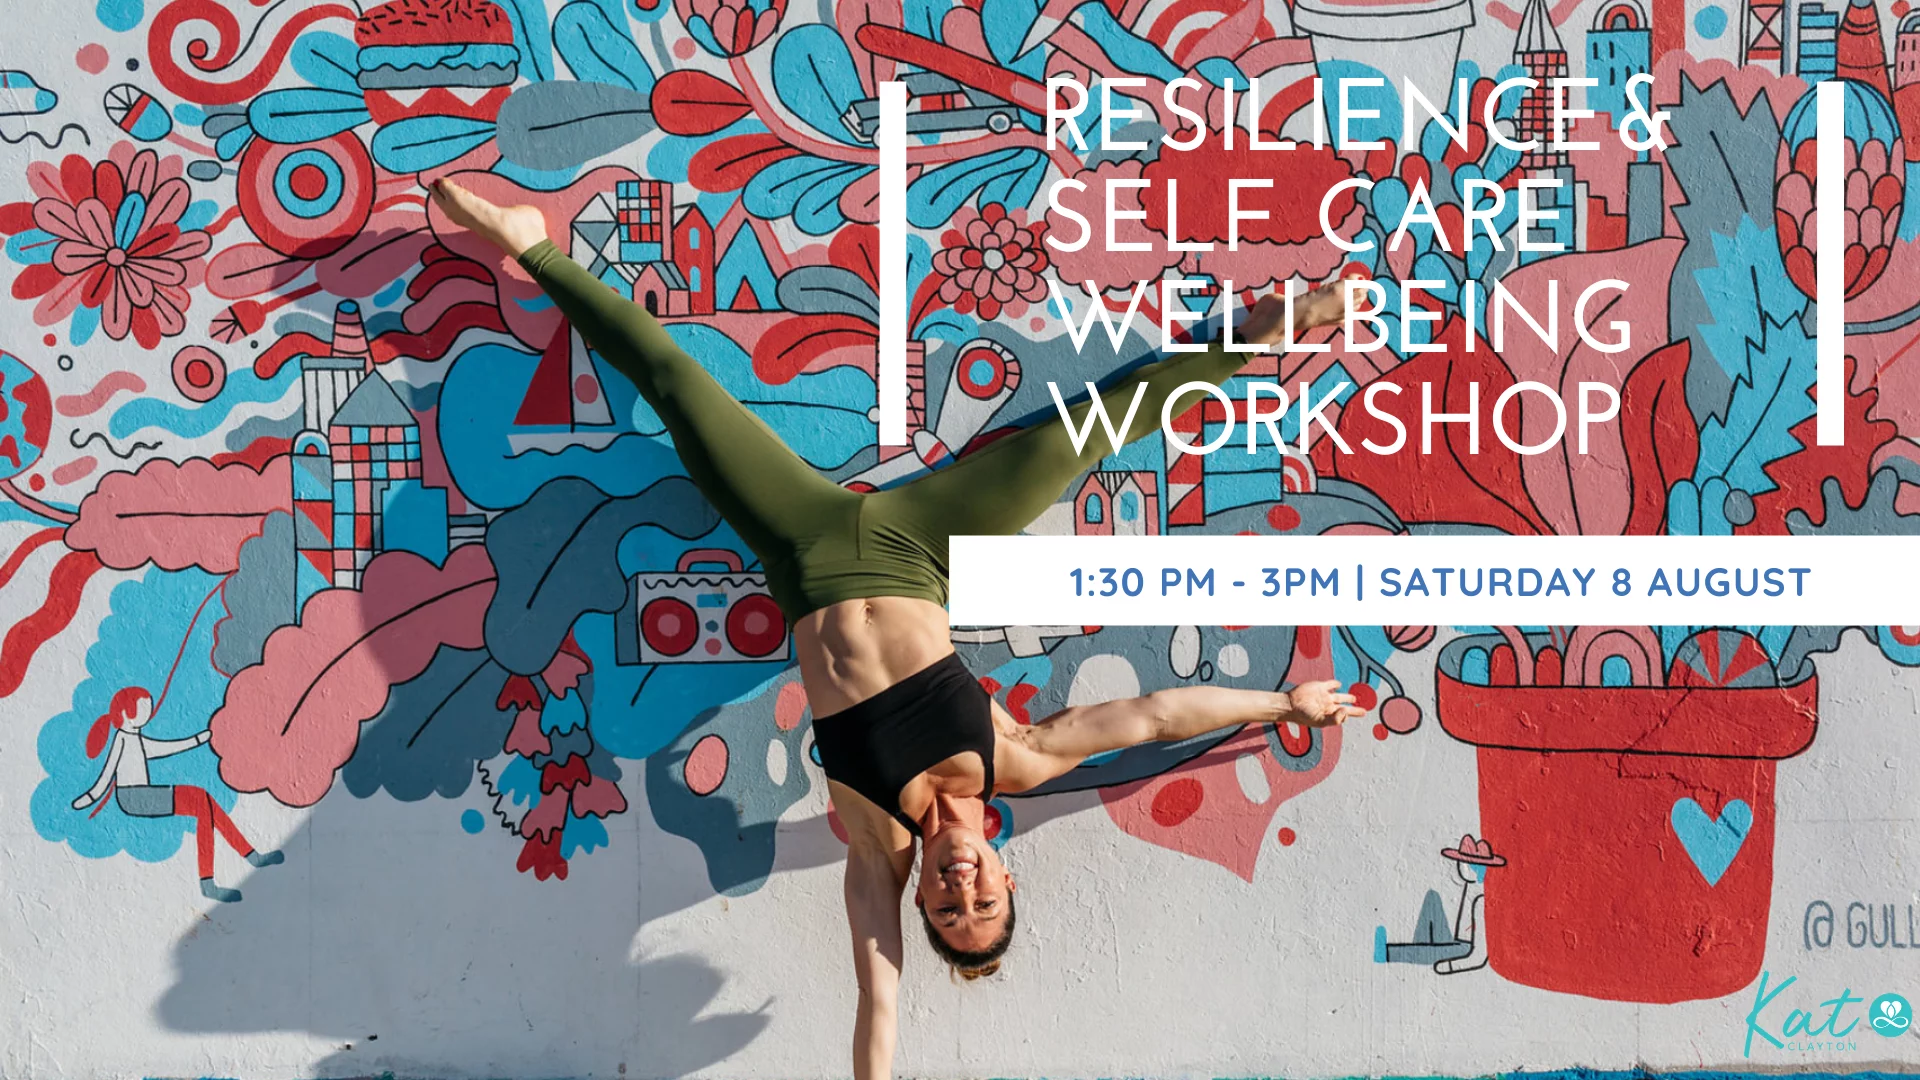 Resilience Self Care Wellbeing Workshop